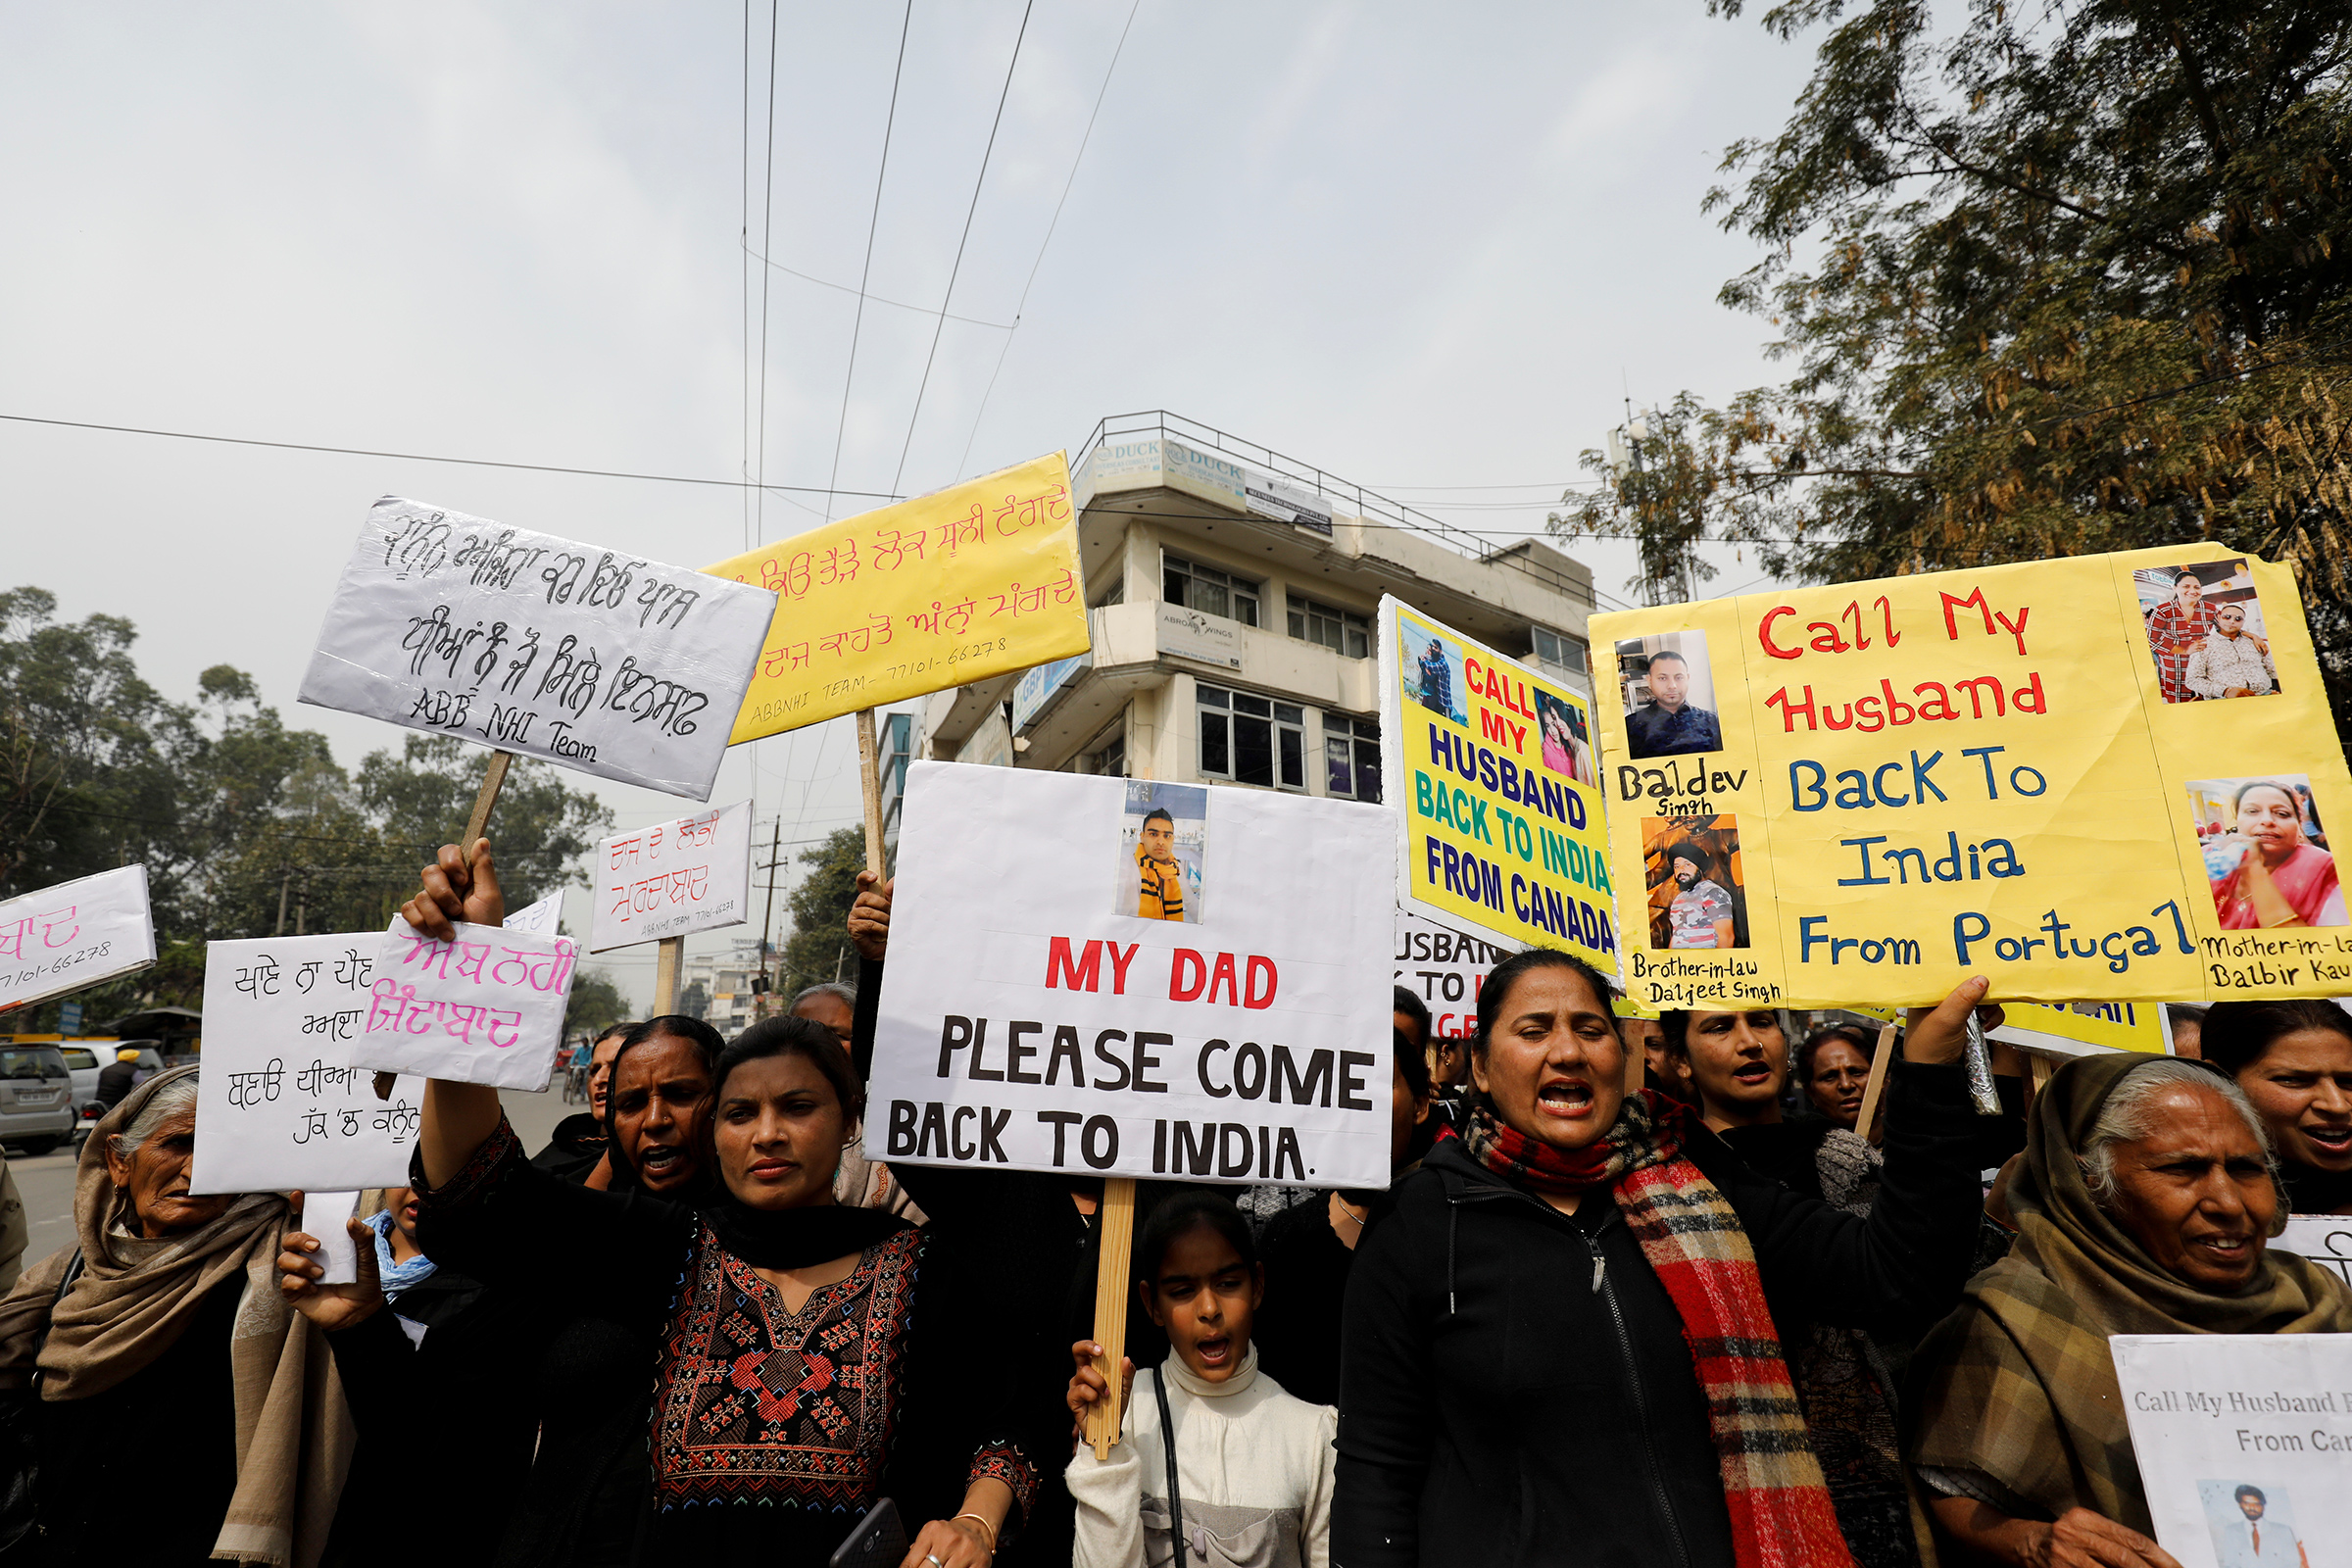 Women who say they have been abandoned by Non-Resident Indian husbands take part in an organiszd protest in Jalandhar, Punjab, India, on March 8, 2019. (Anushree Fadnavis—Reuters)